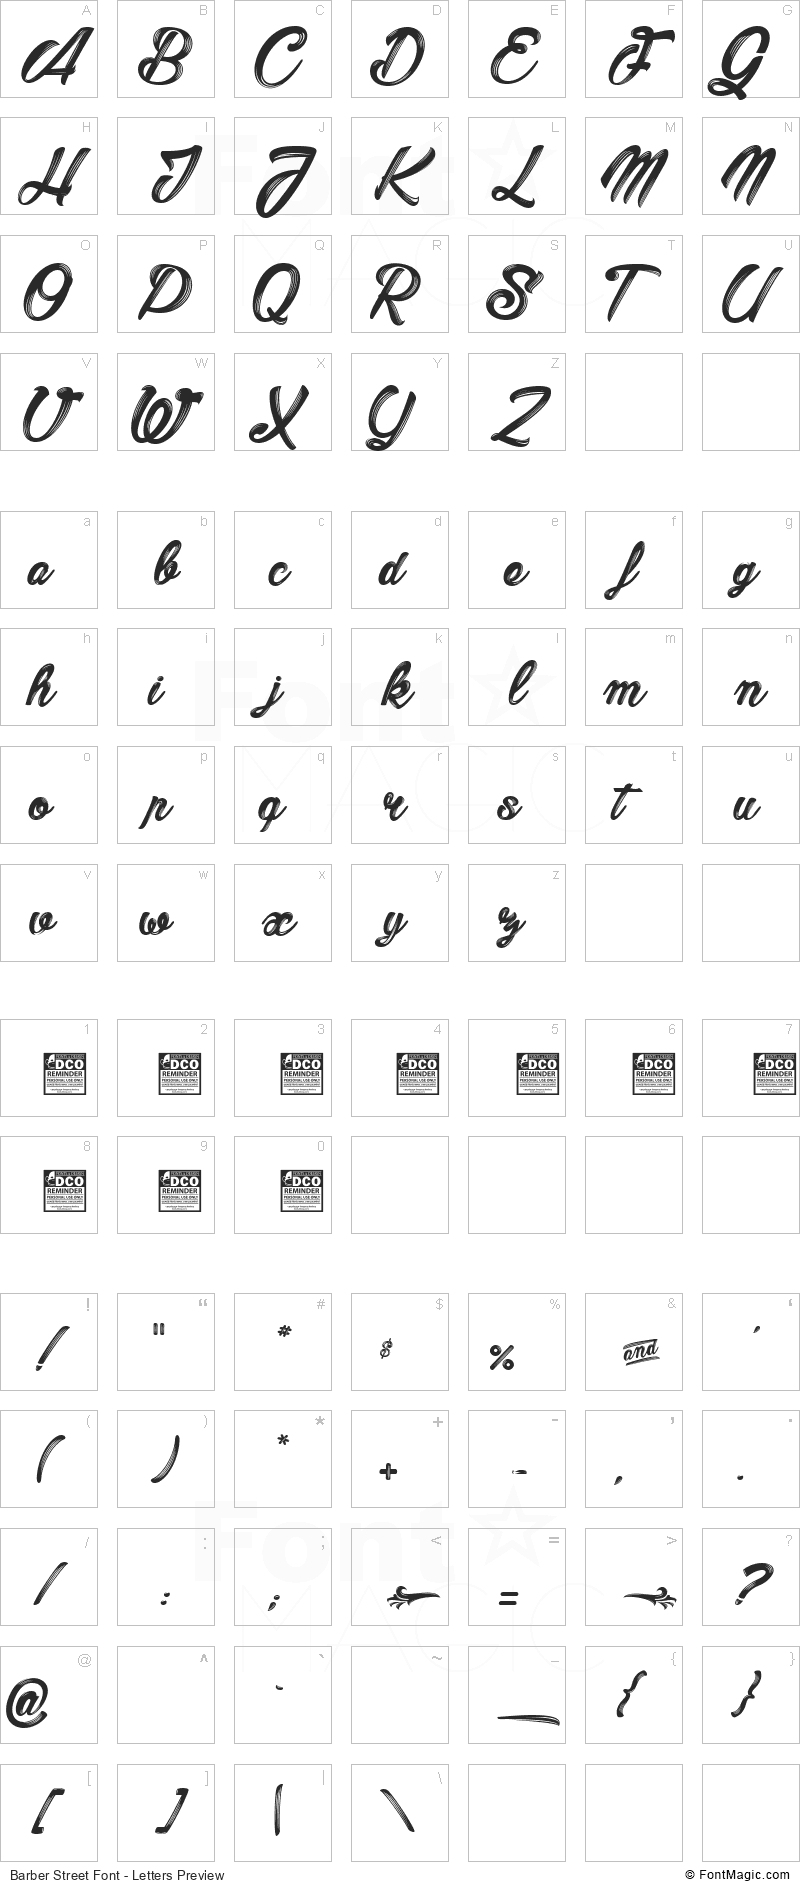 Barber Street Font - All Latters Preview Chart